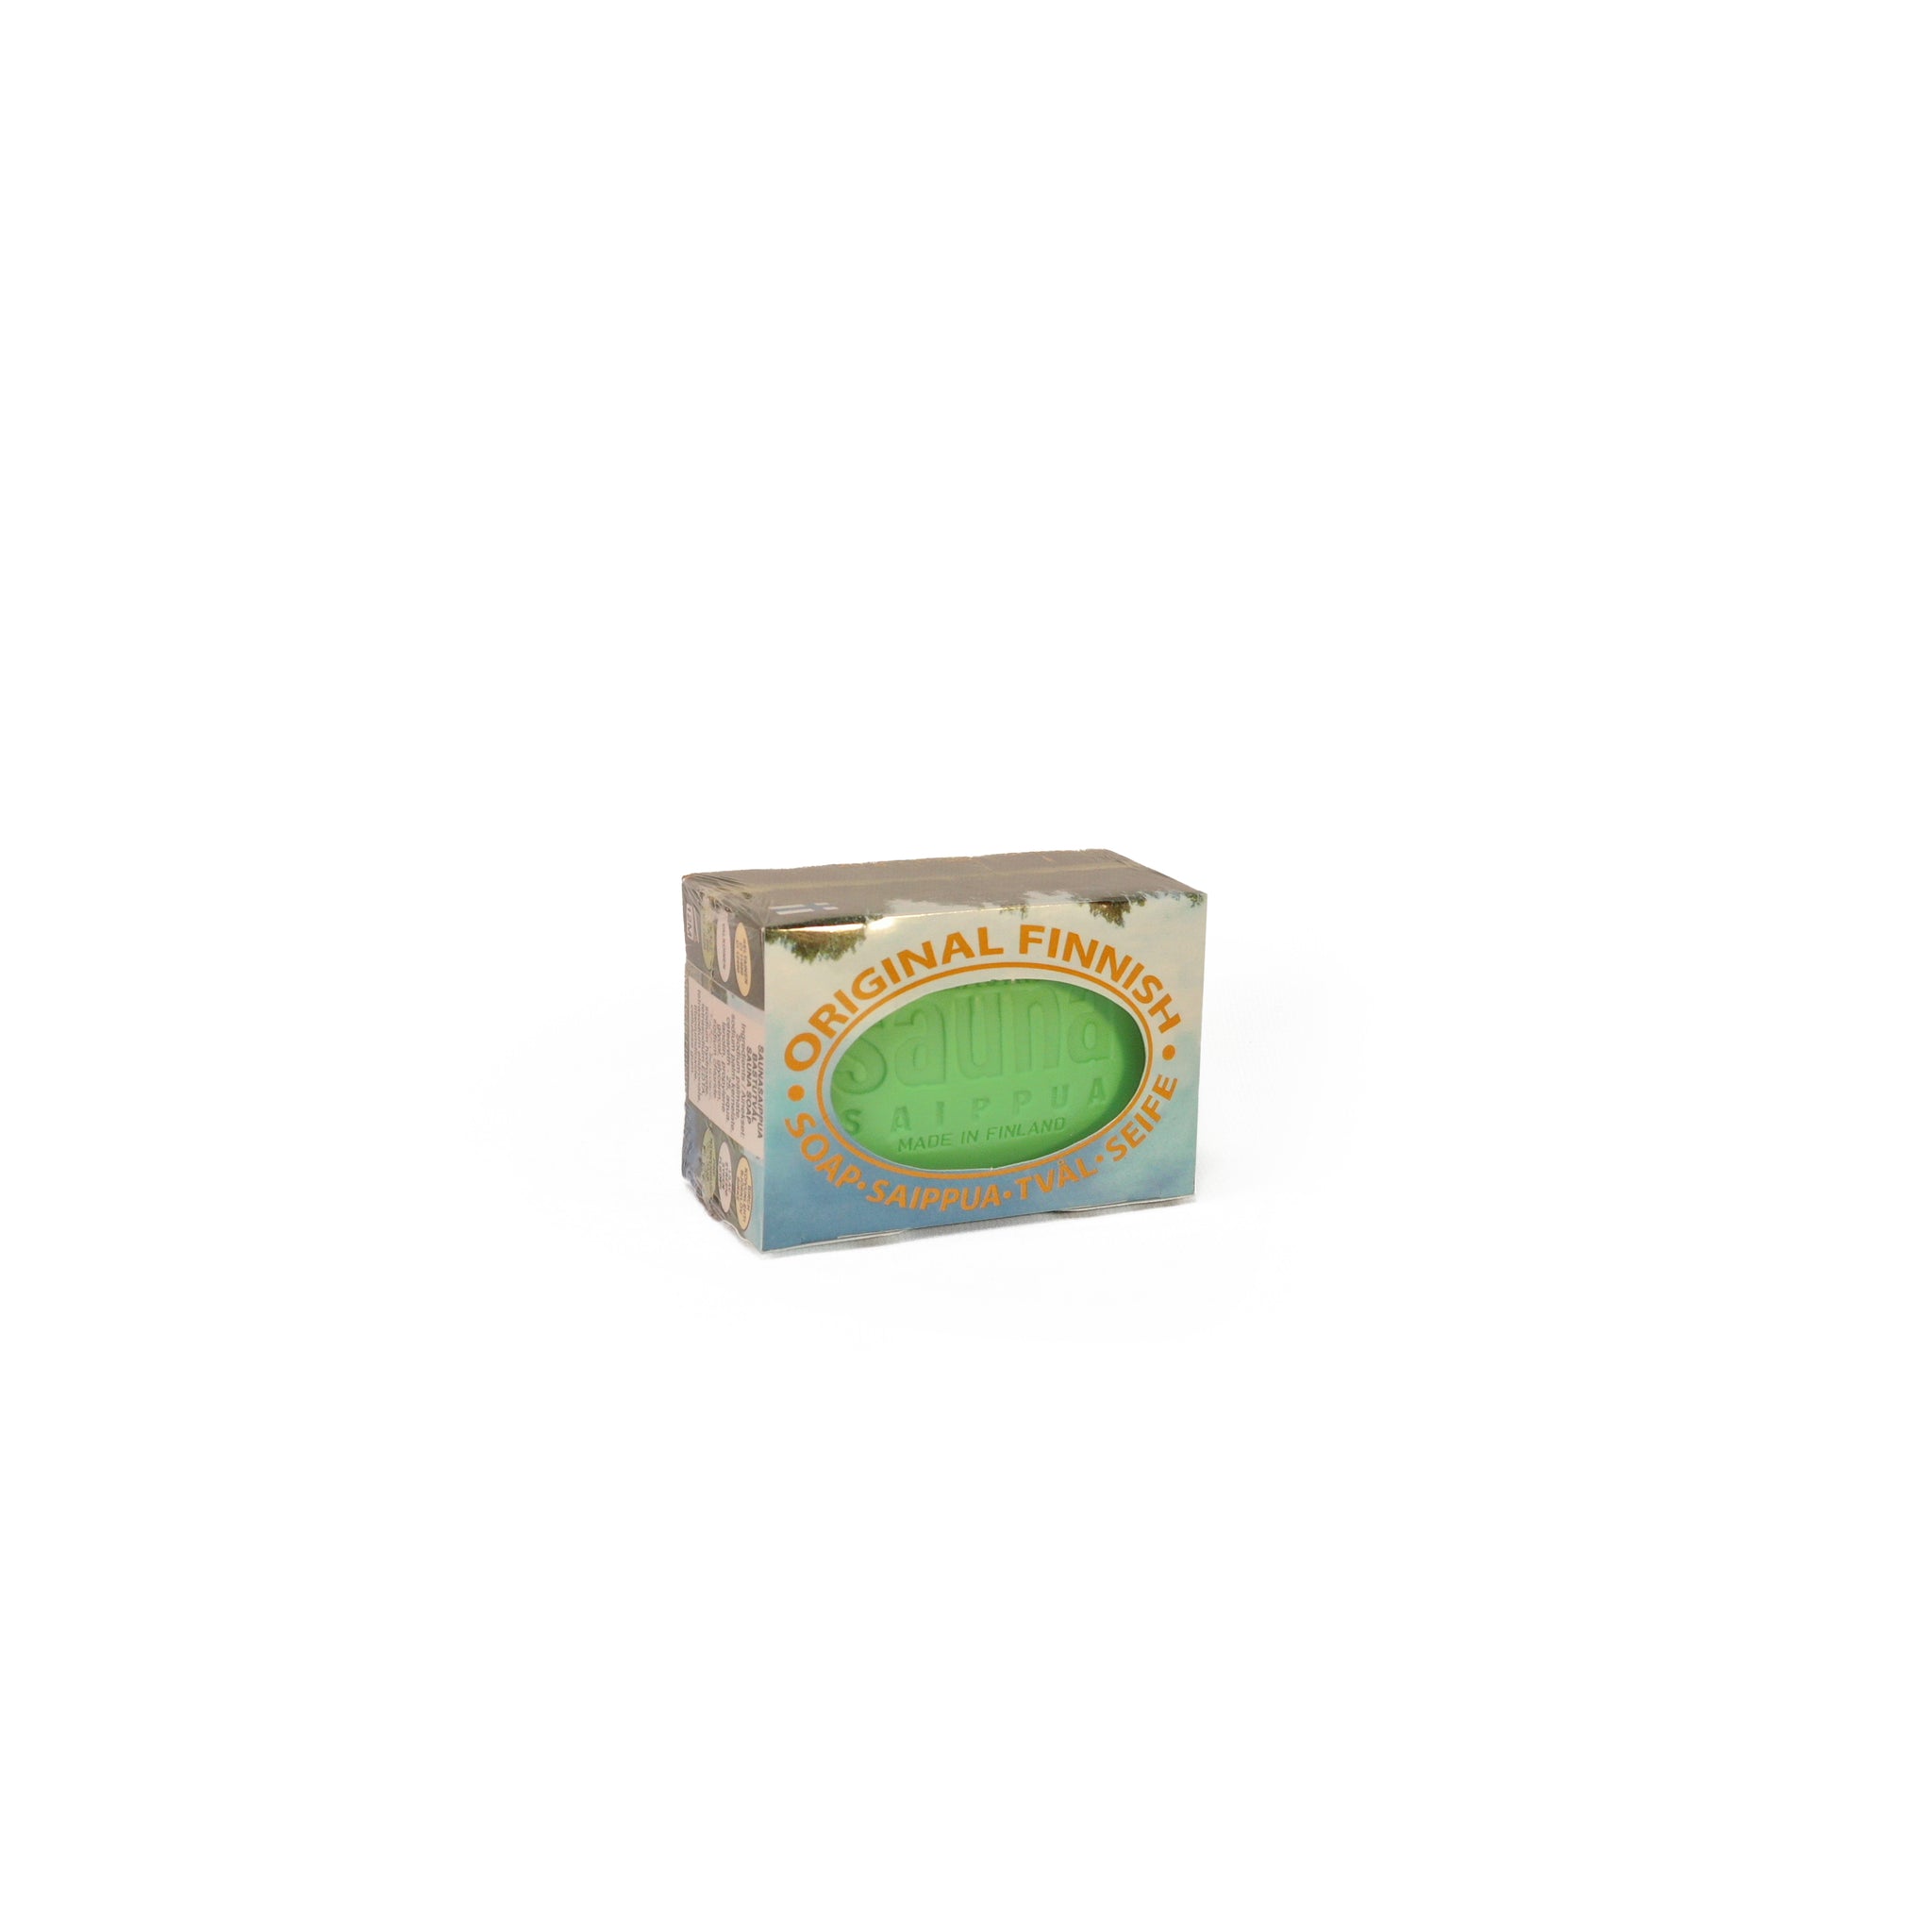 Box containing green pine scented soap bar on white background.